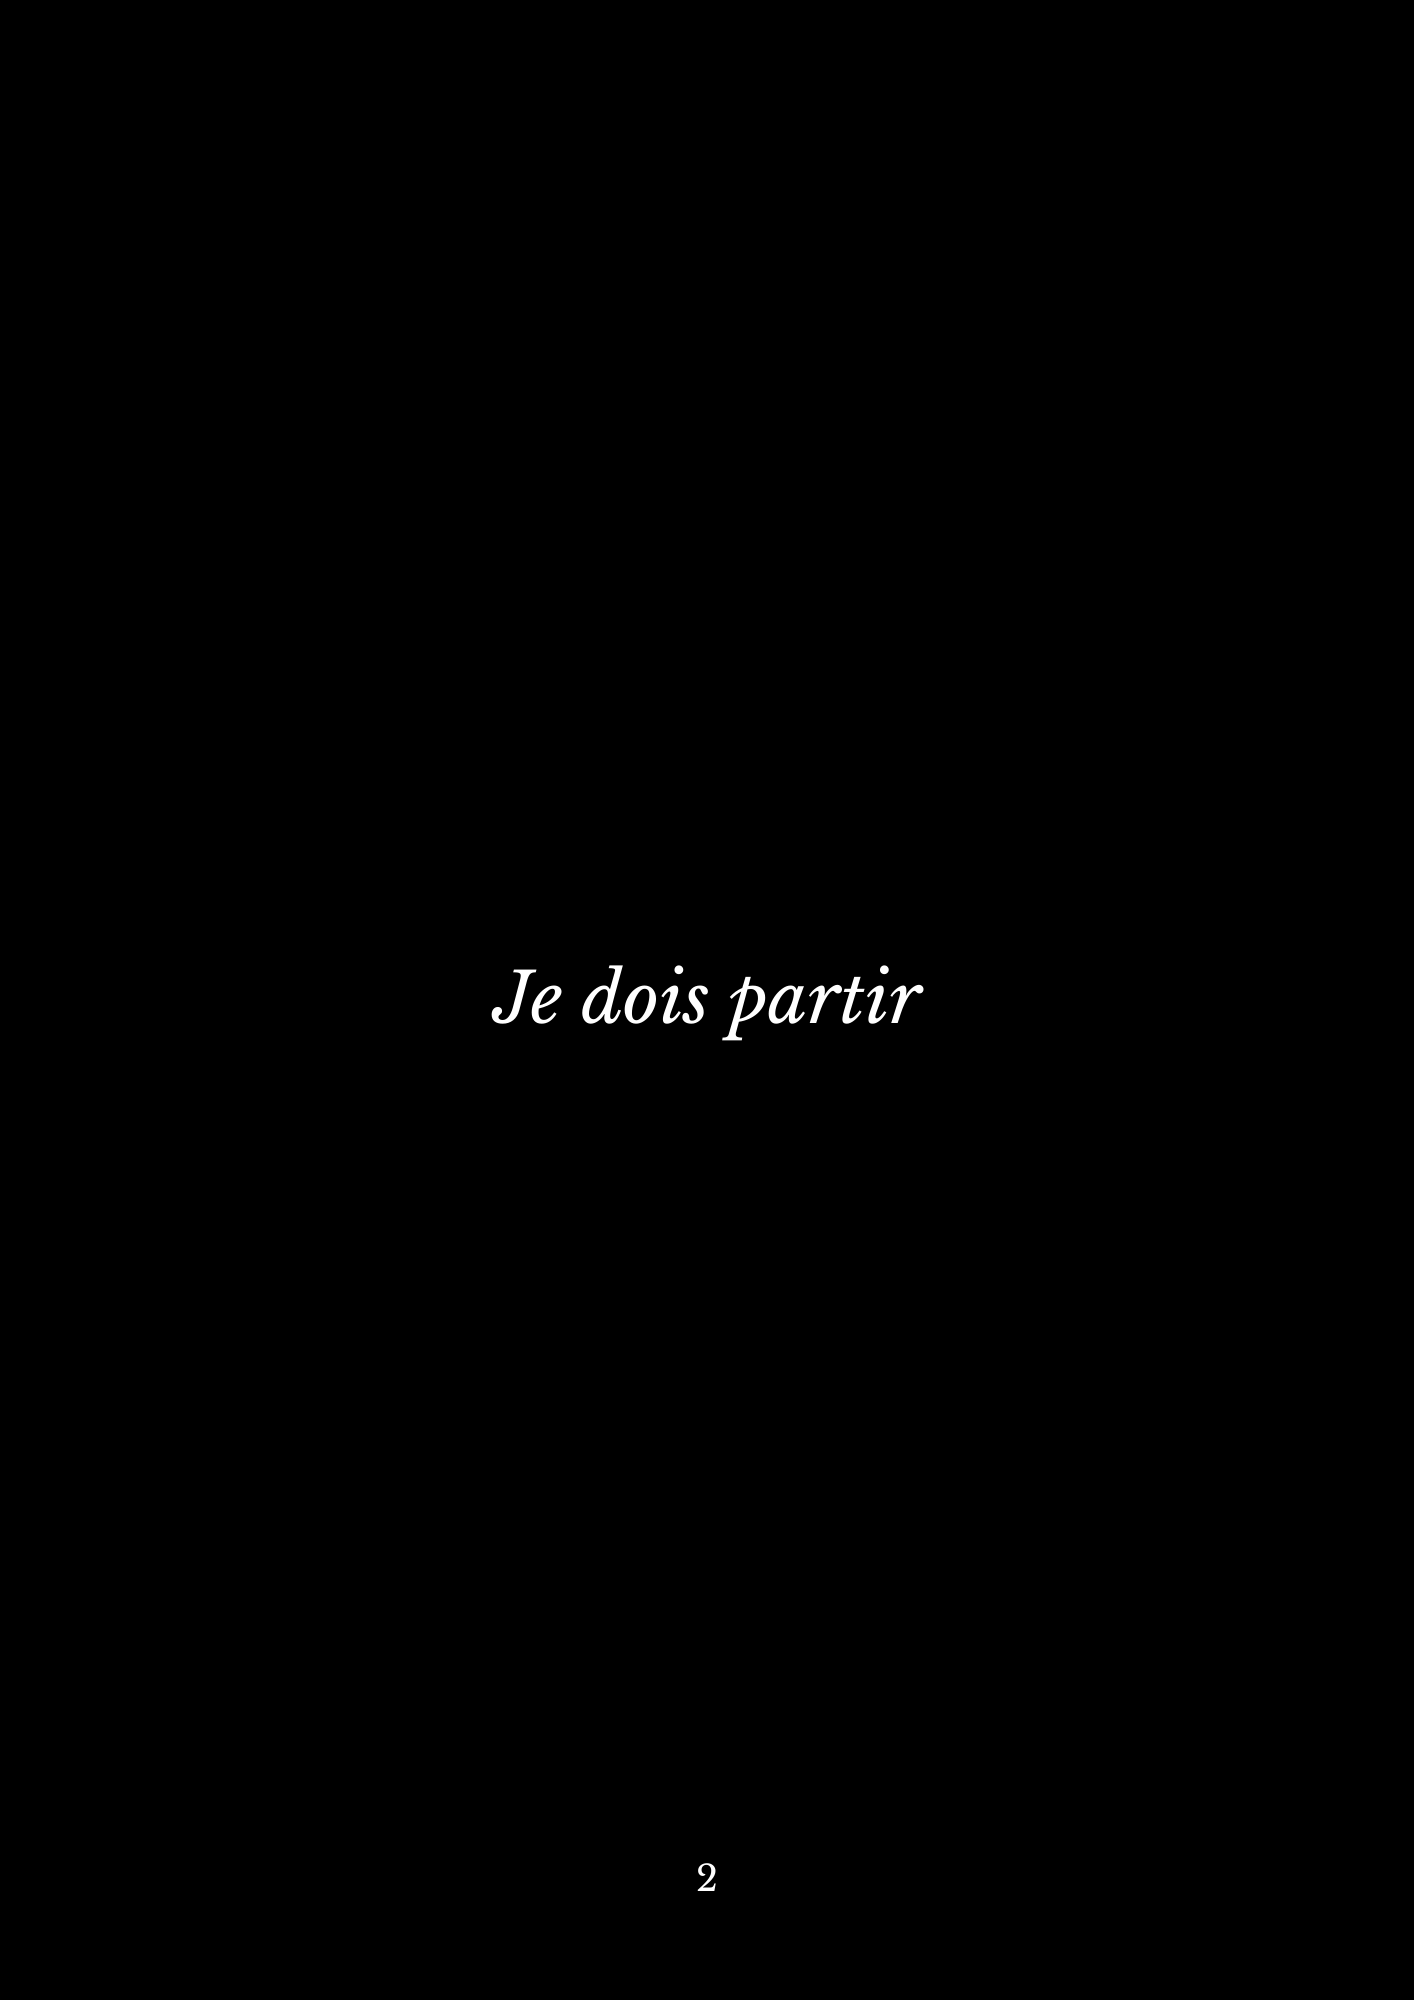 Black background with the title of the short story 'Je dois partir' written in French. Presented in an aesthetic manner.